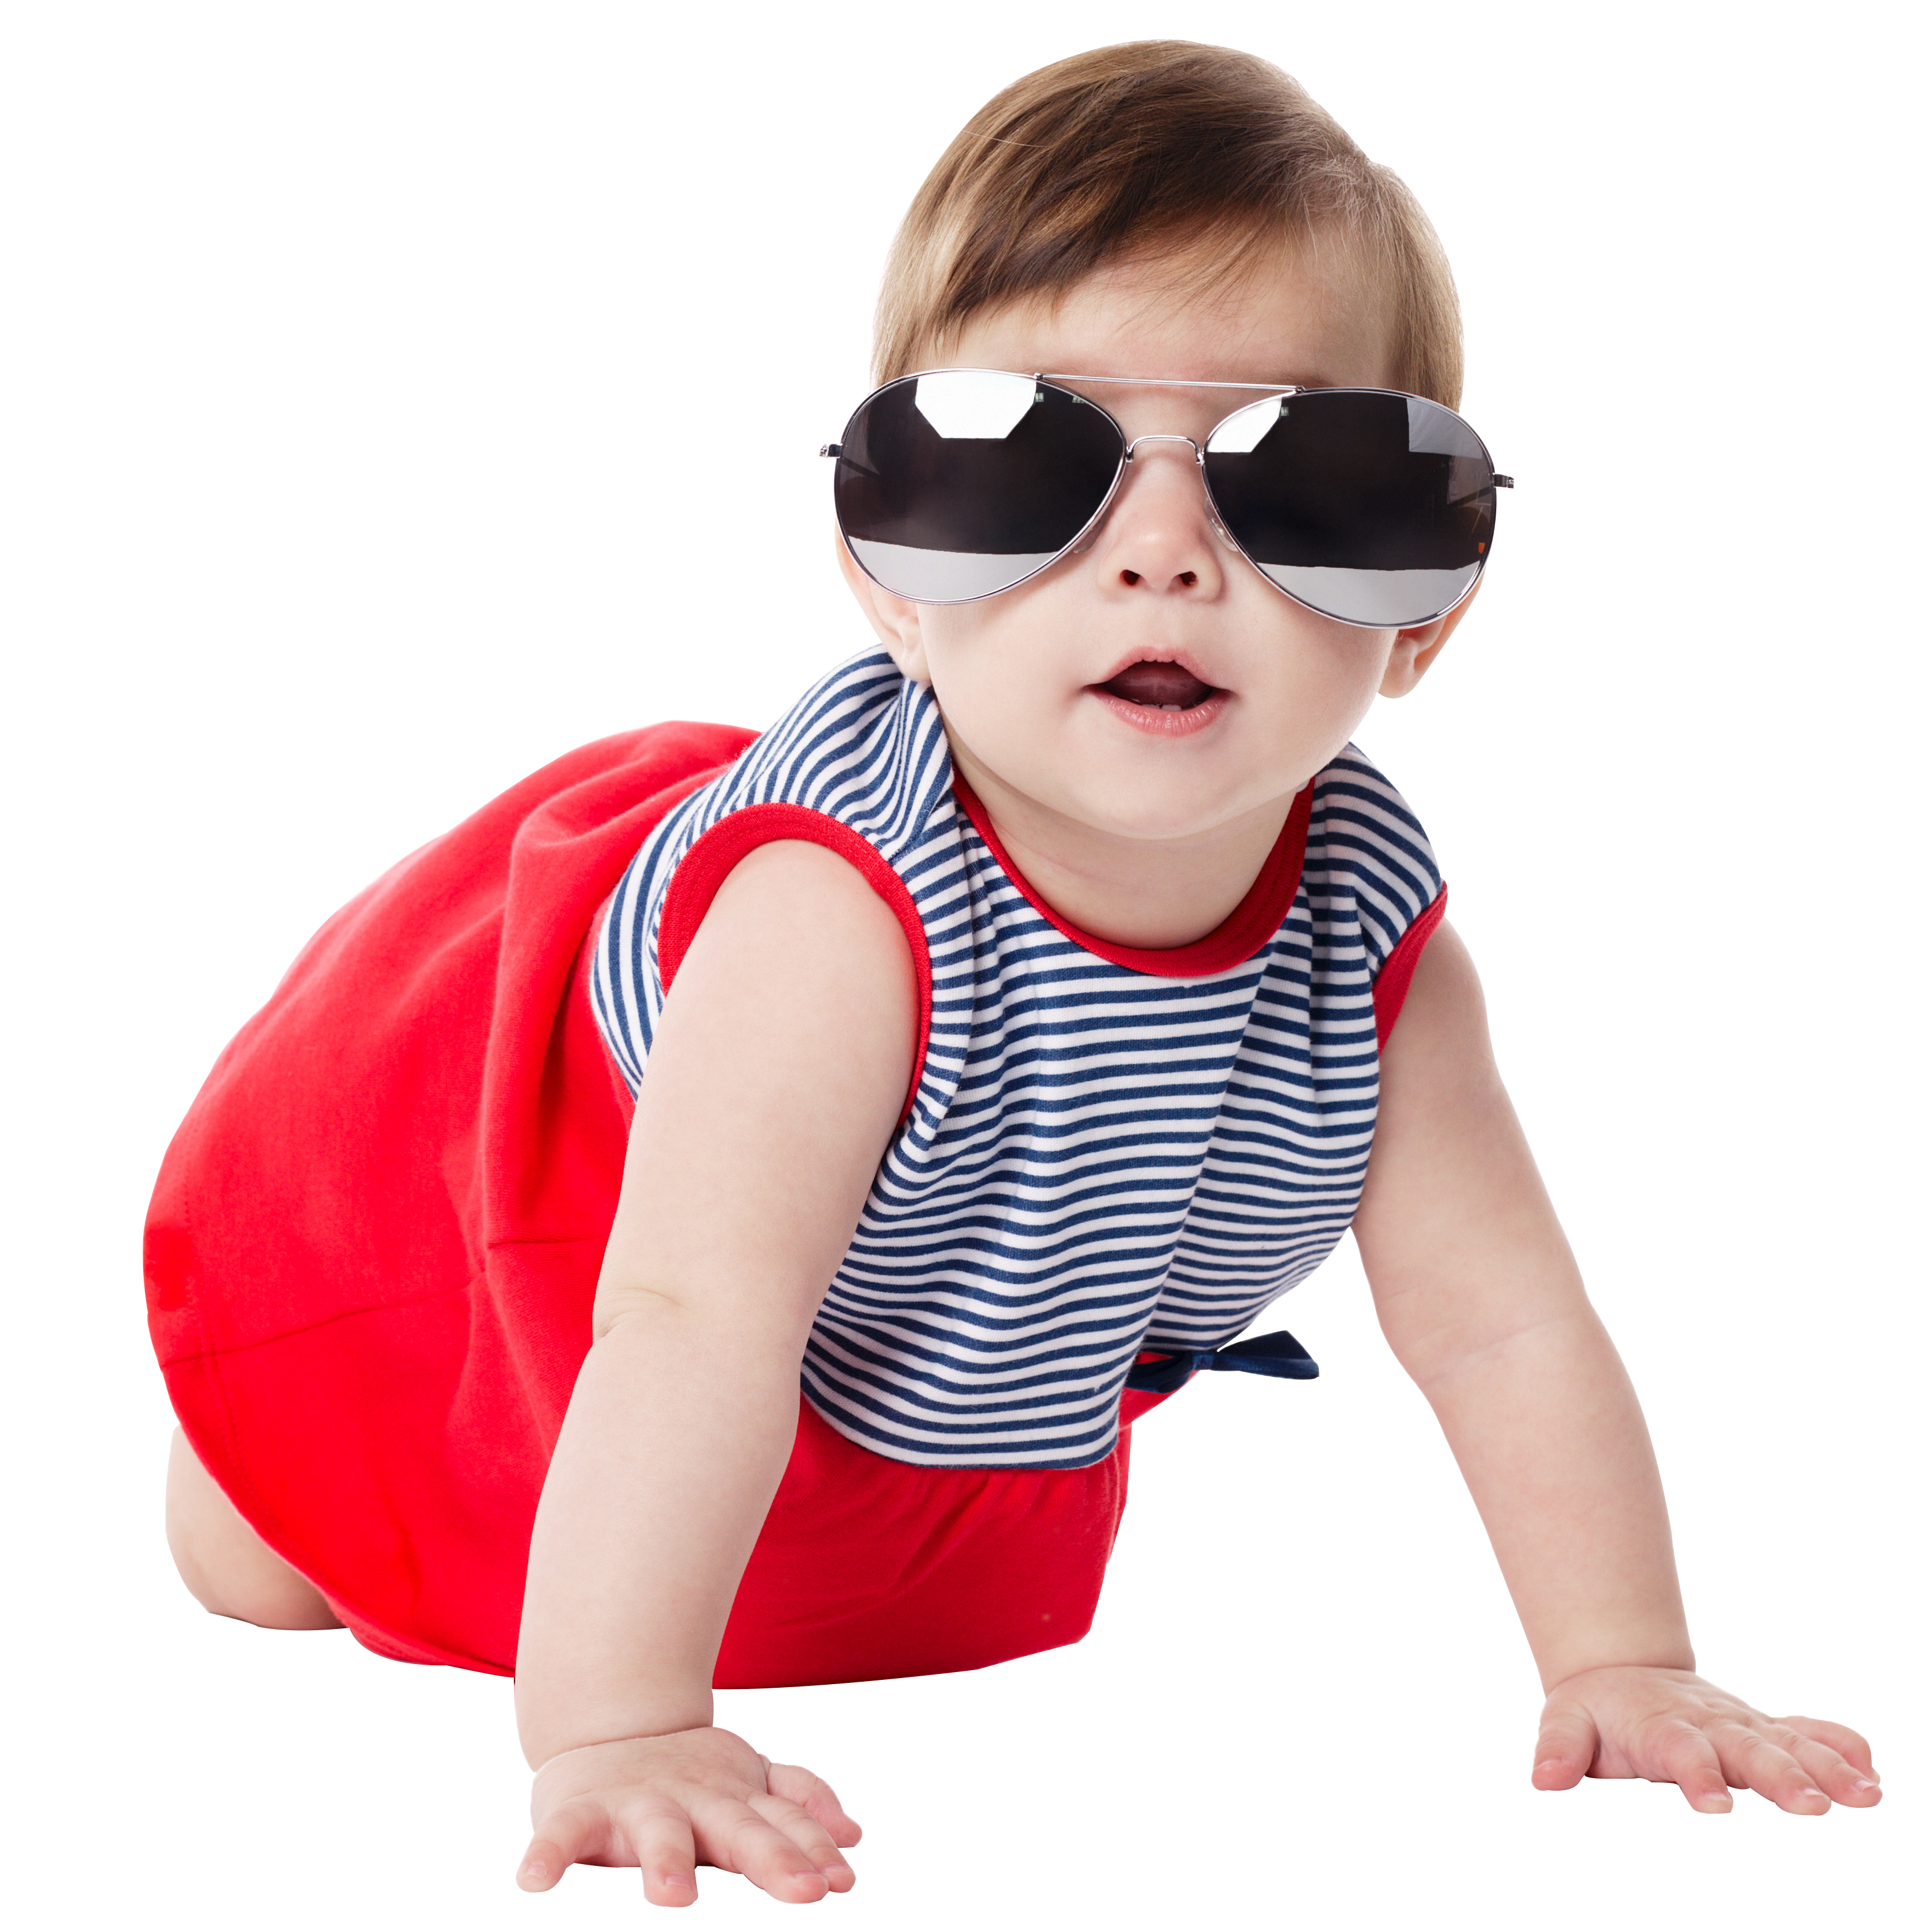 Infant Sunglasses Photography Creative Baby Child Cuteness Clipart